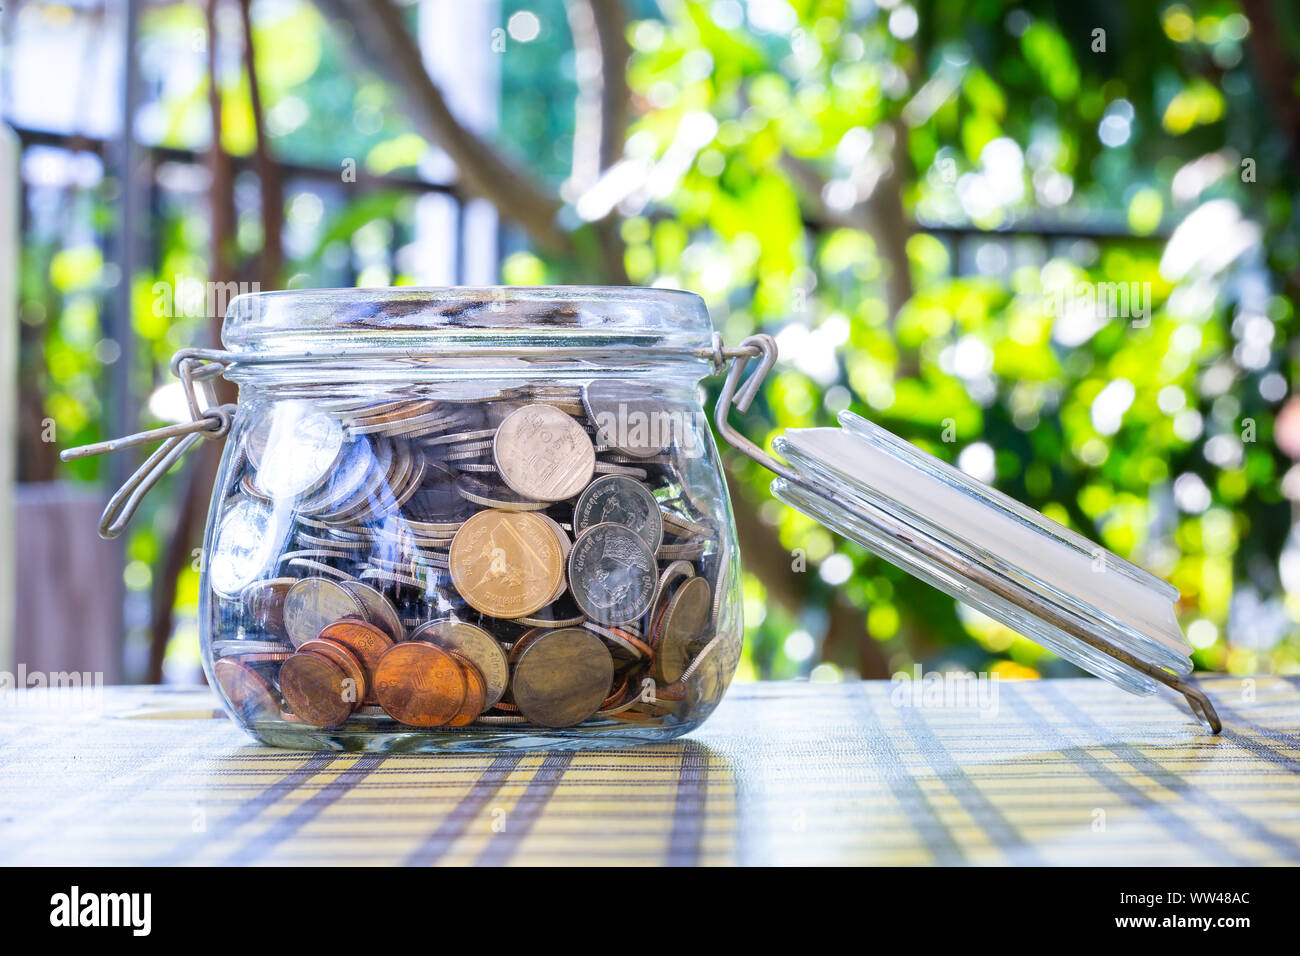 Many coins in glass jar, saving. concept business. Stock Photo